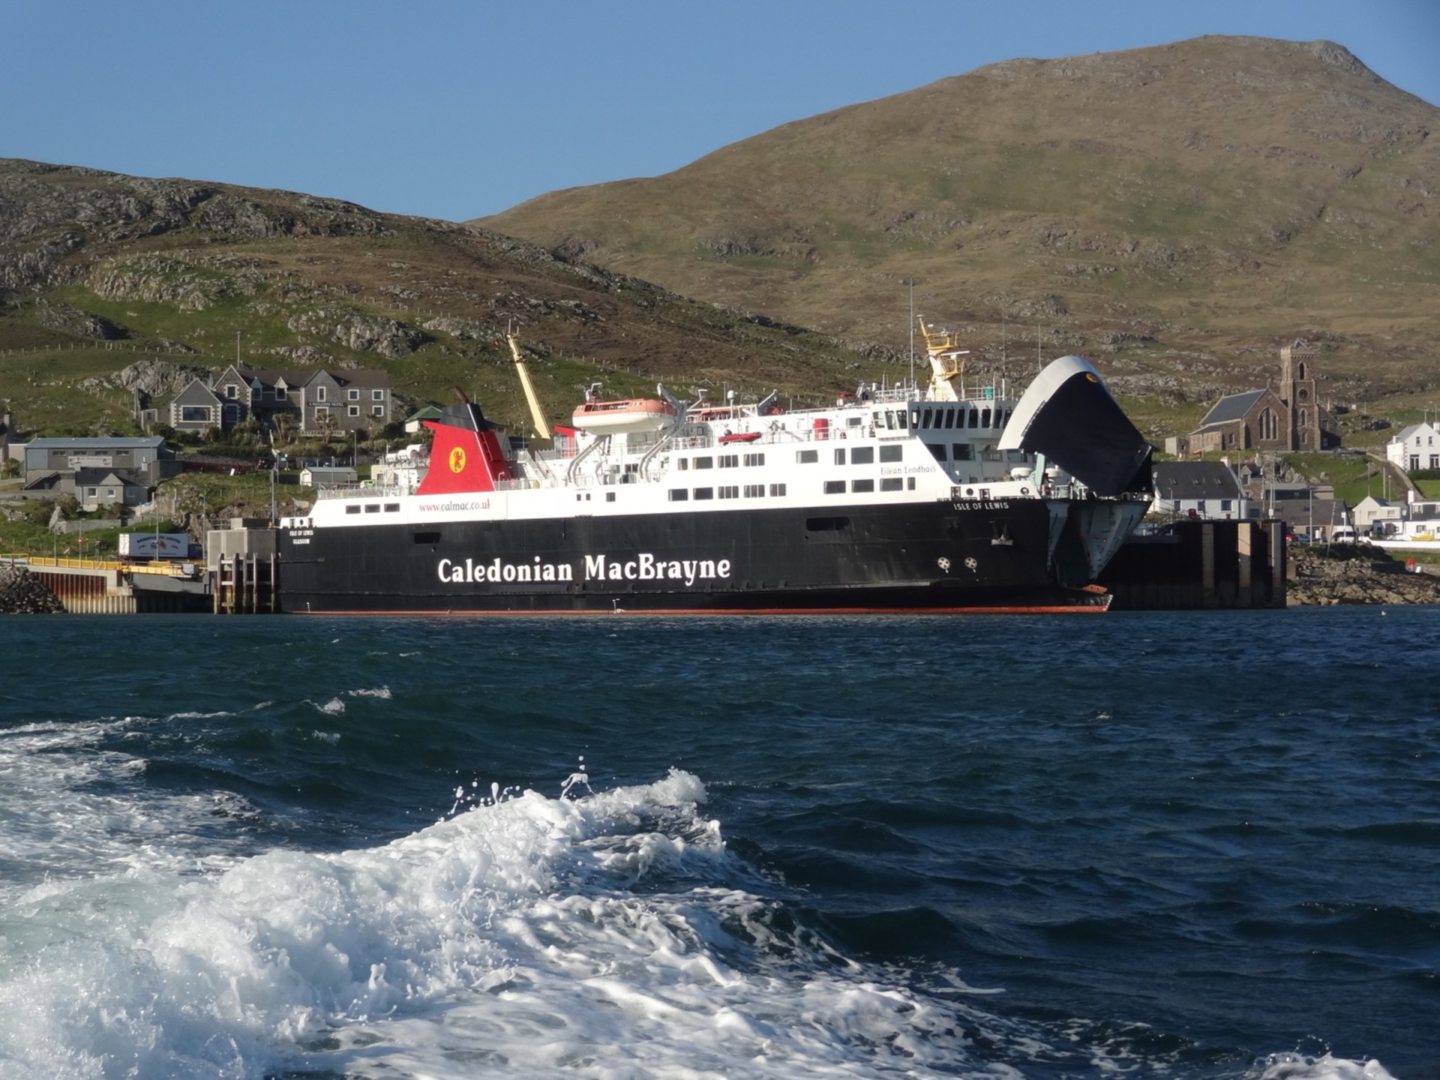 The Isle of Lewis is unable to move from its position in Castlebay